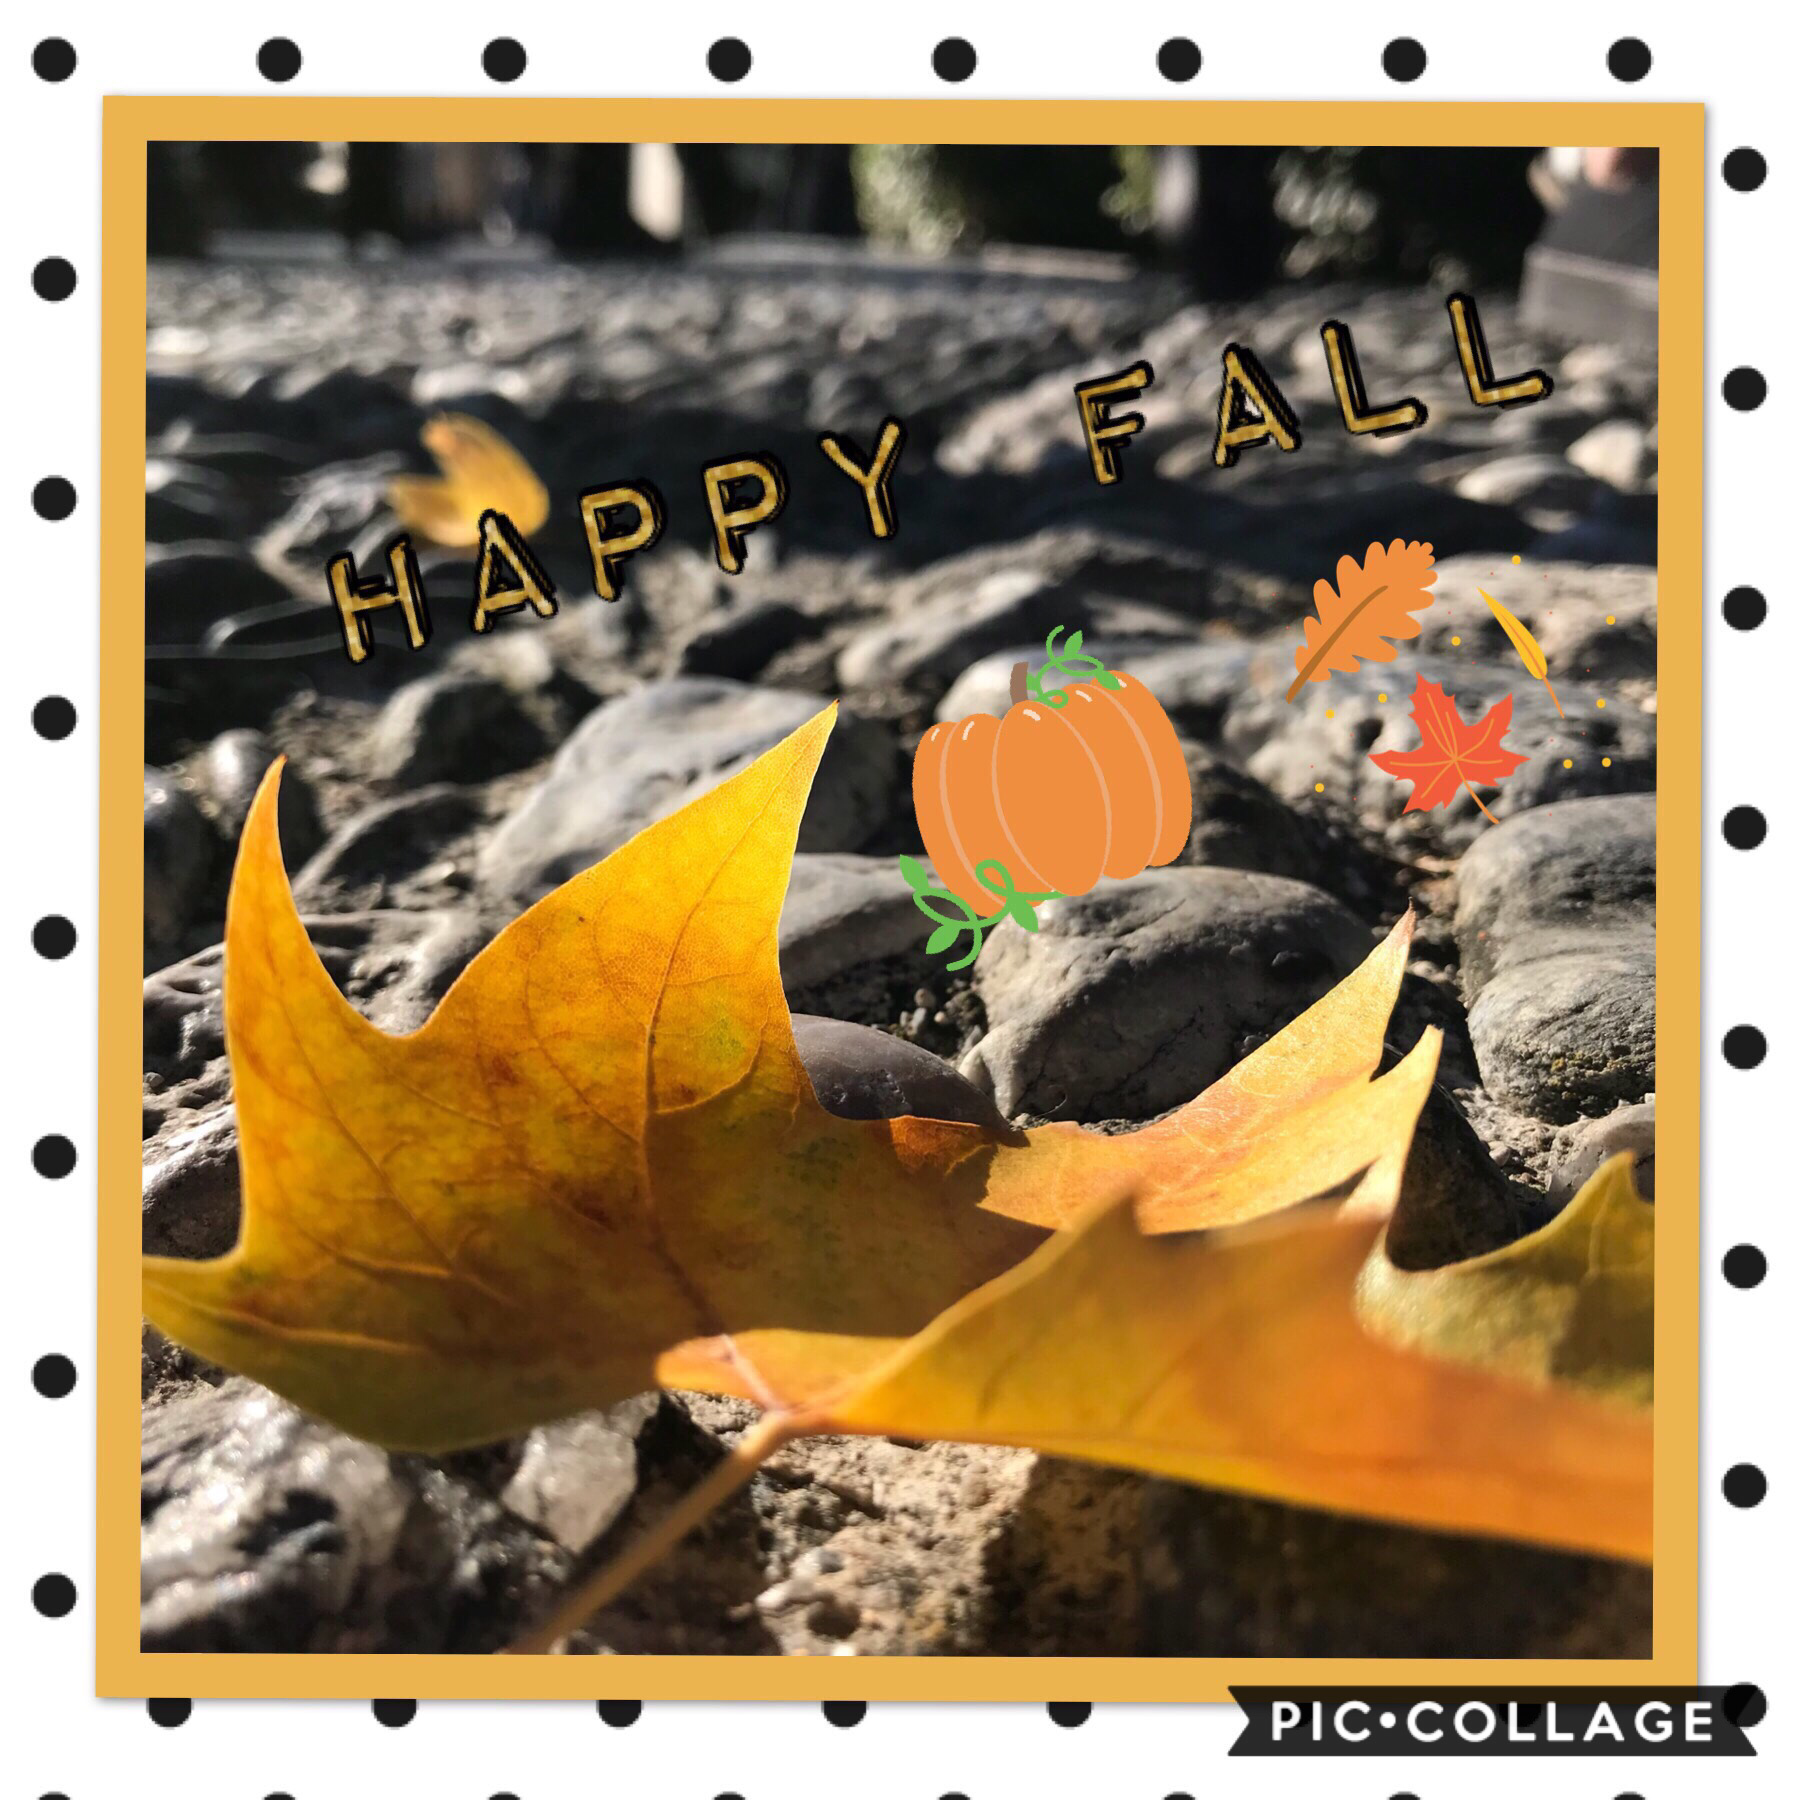 Happy Fall! Also, this is my first post!!! Follow me for more collages
🧡🍂